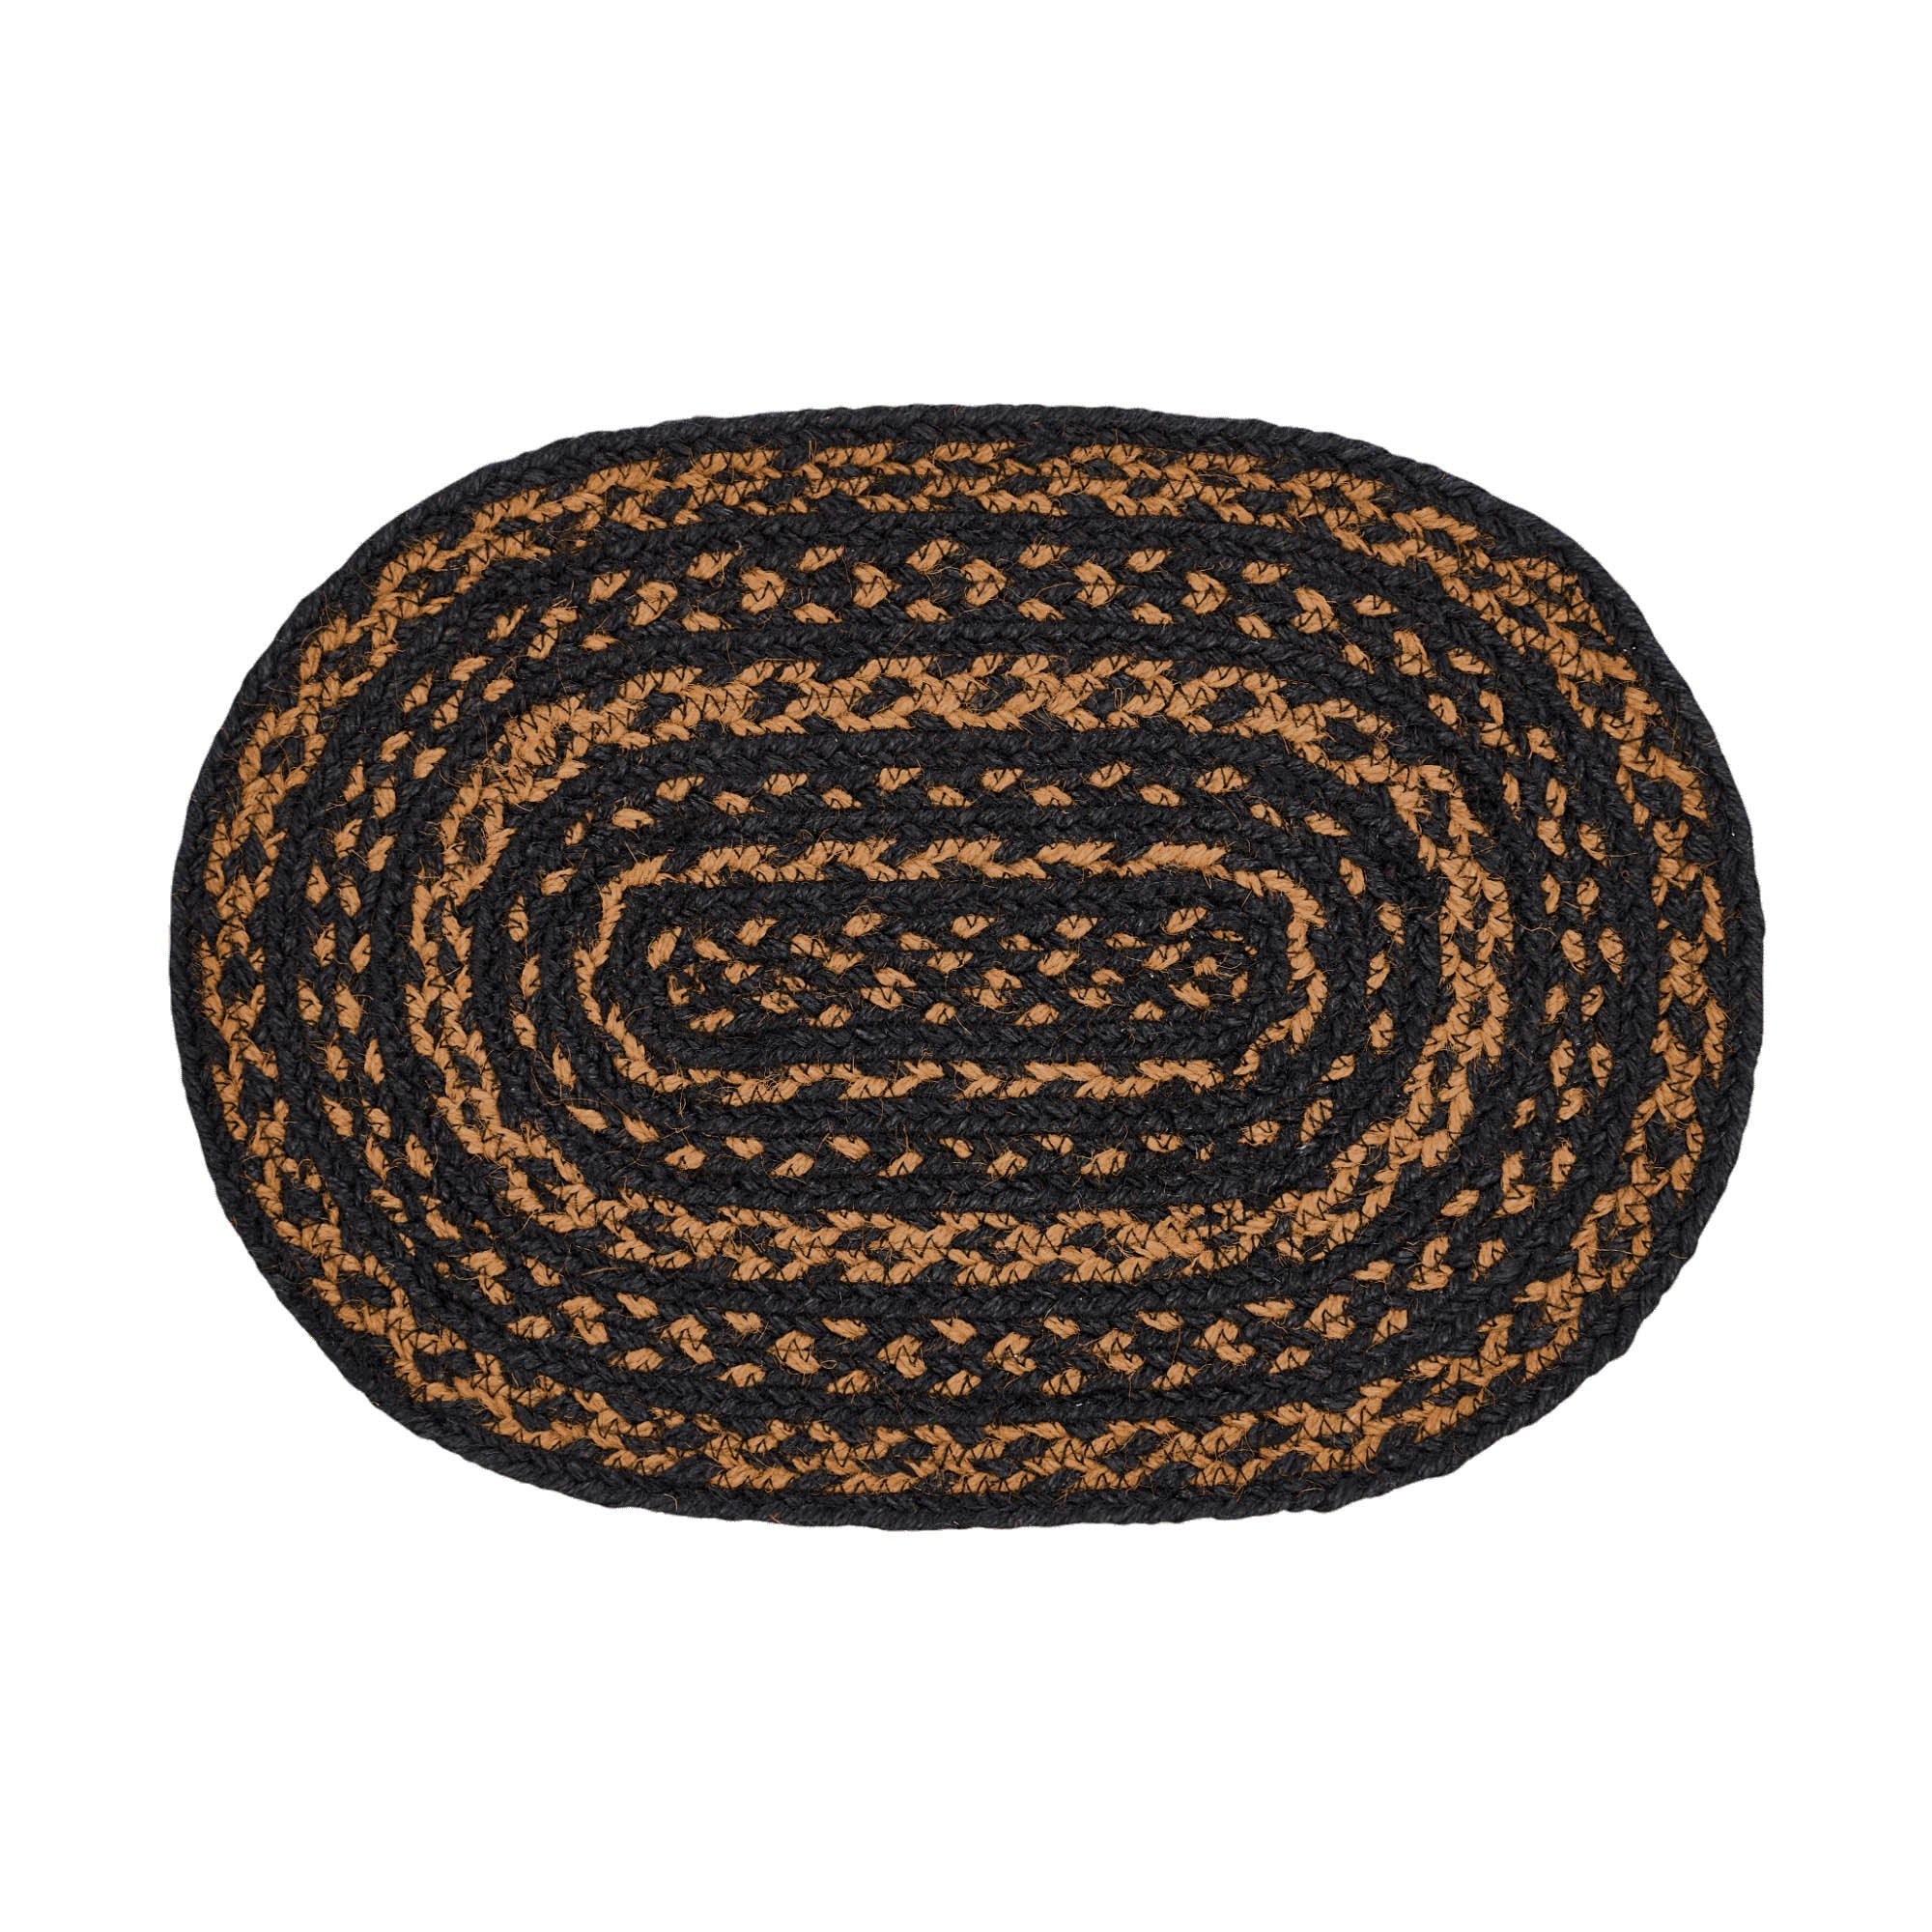 Mayflower Market Black & Tan Jute Oval Placemat 10x15 By VHC Brands